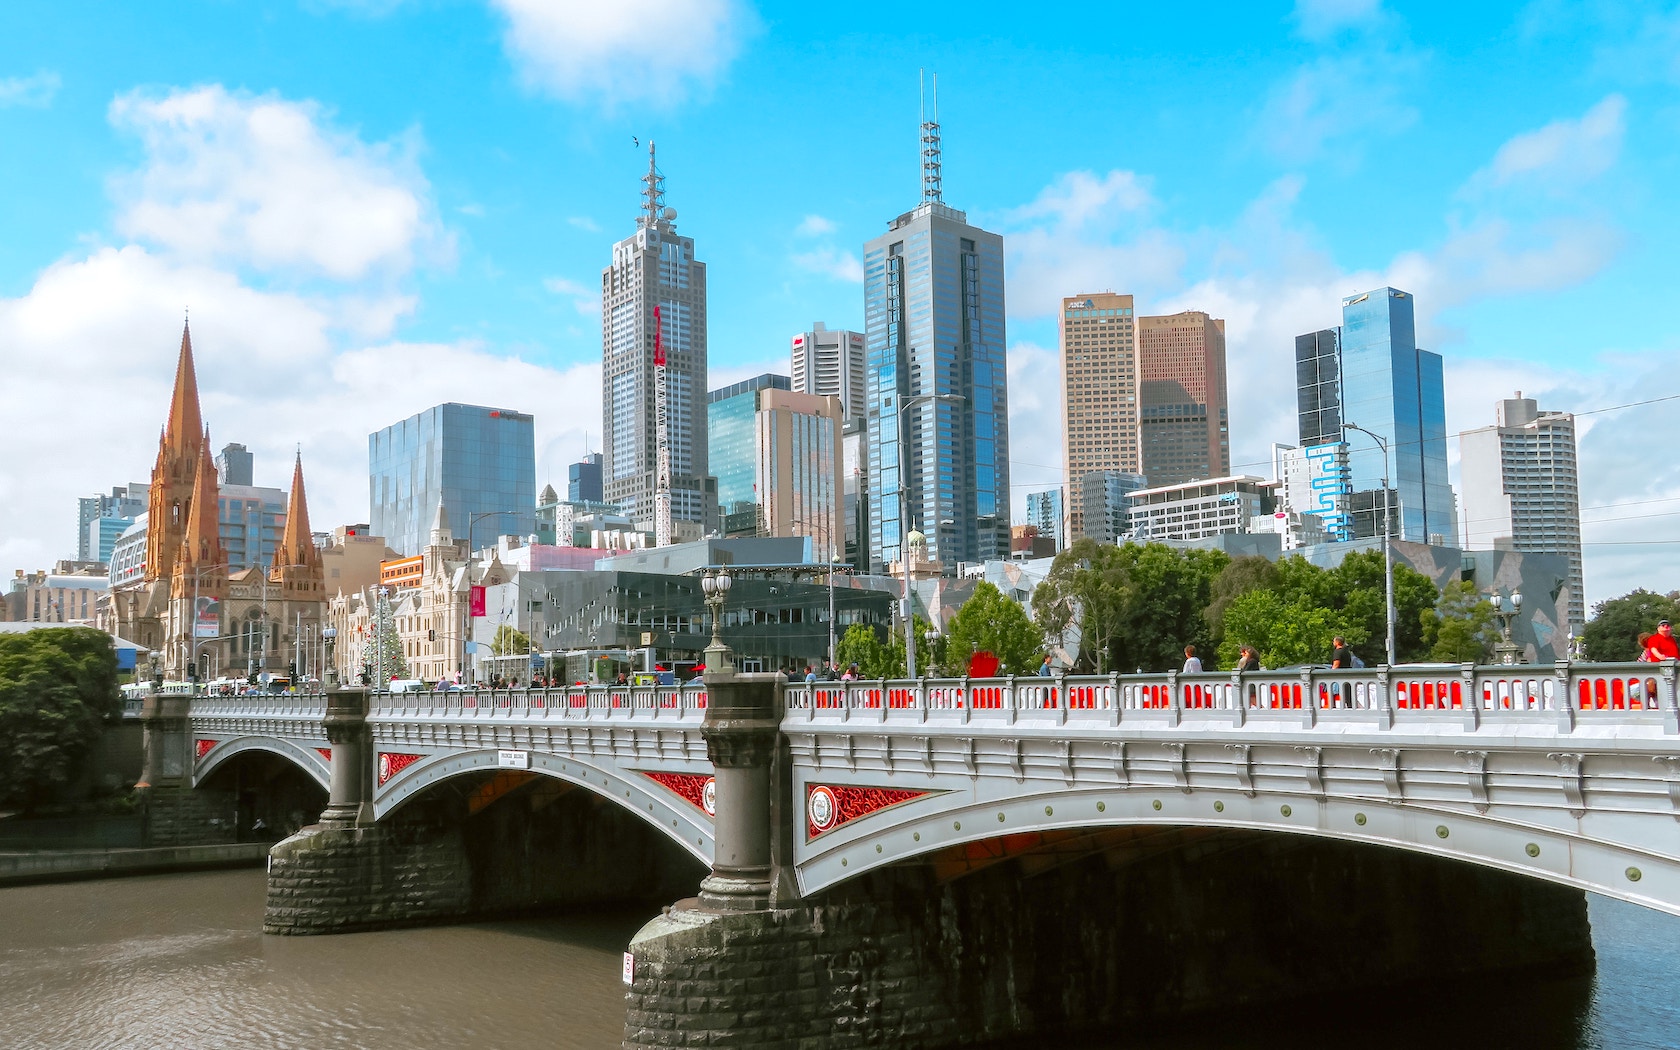 Melbourne And Sydney Are Two Of The World's Most Liveable Cities